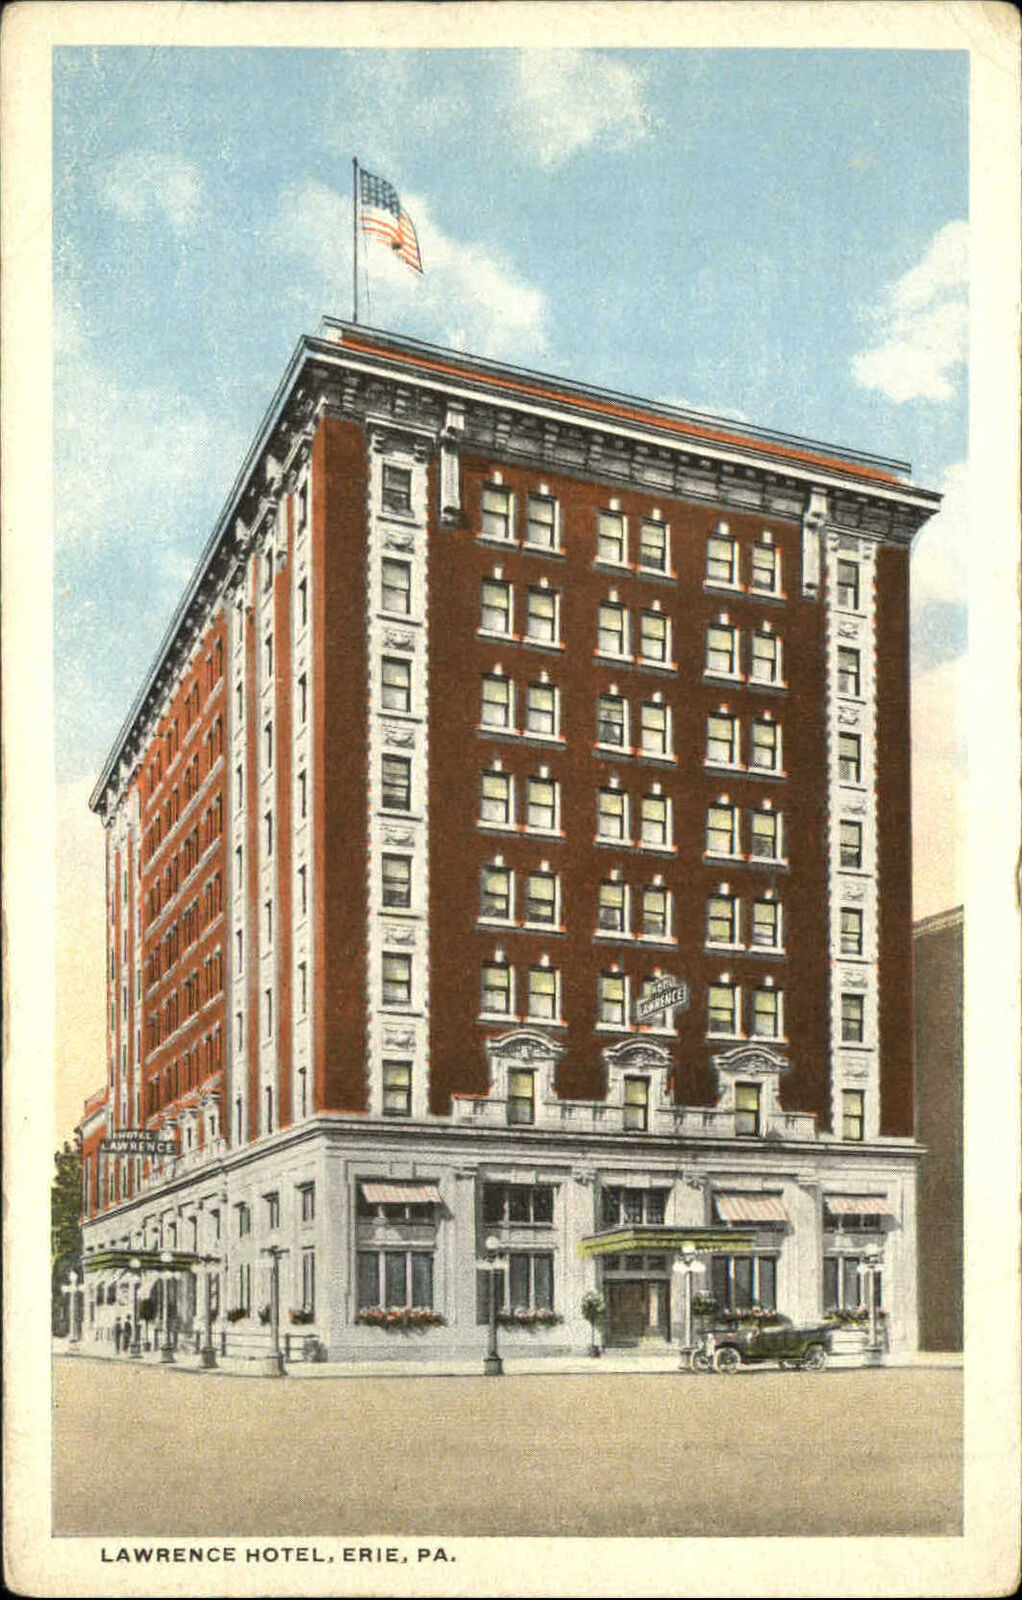 Lawrence Hotel Erie Pennsylvania PA HH Hamm Publisher 1920s